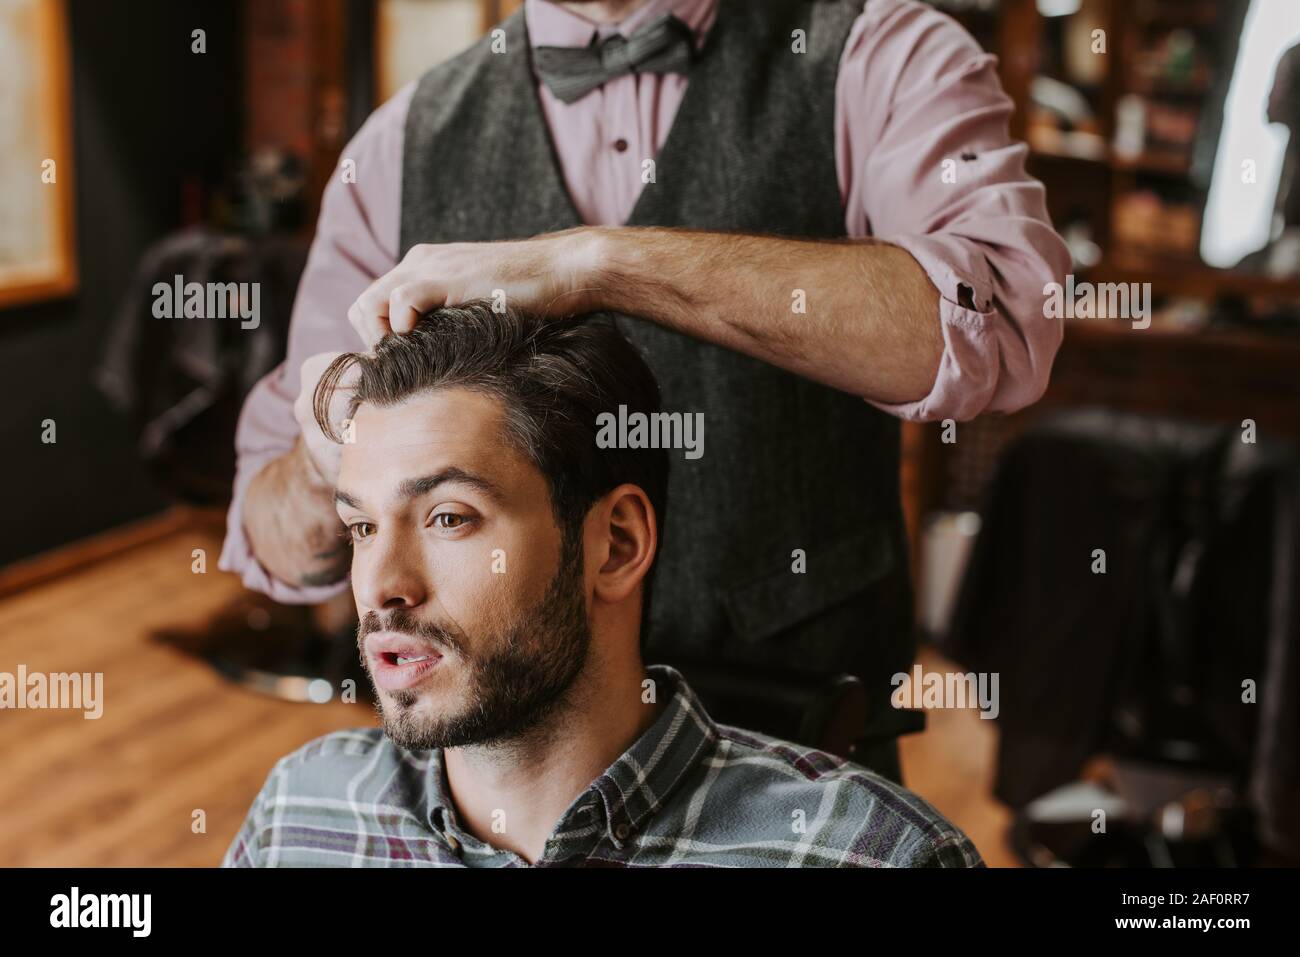 barber styling hair on handsome bearded man Stock Photo